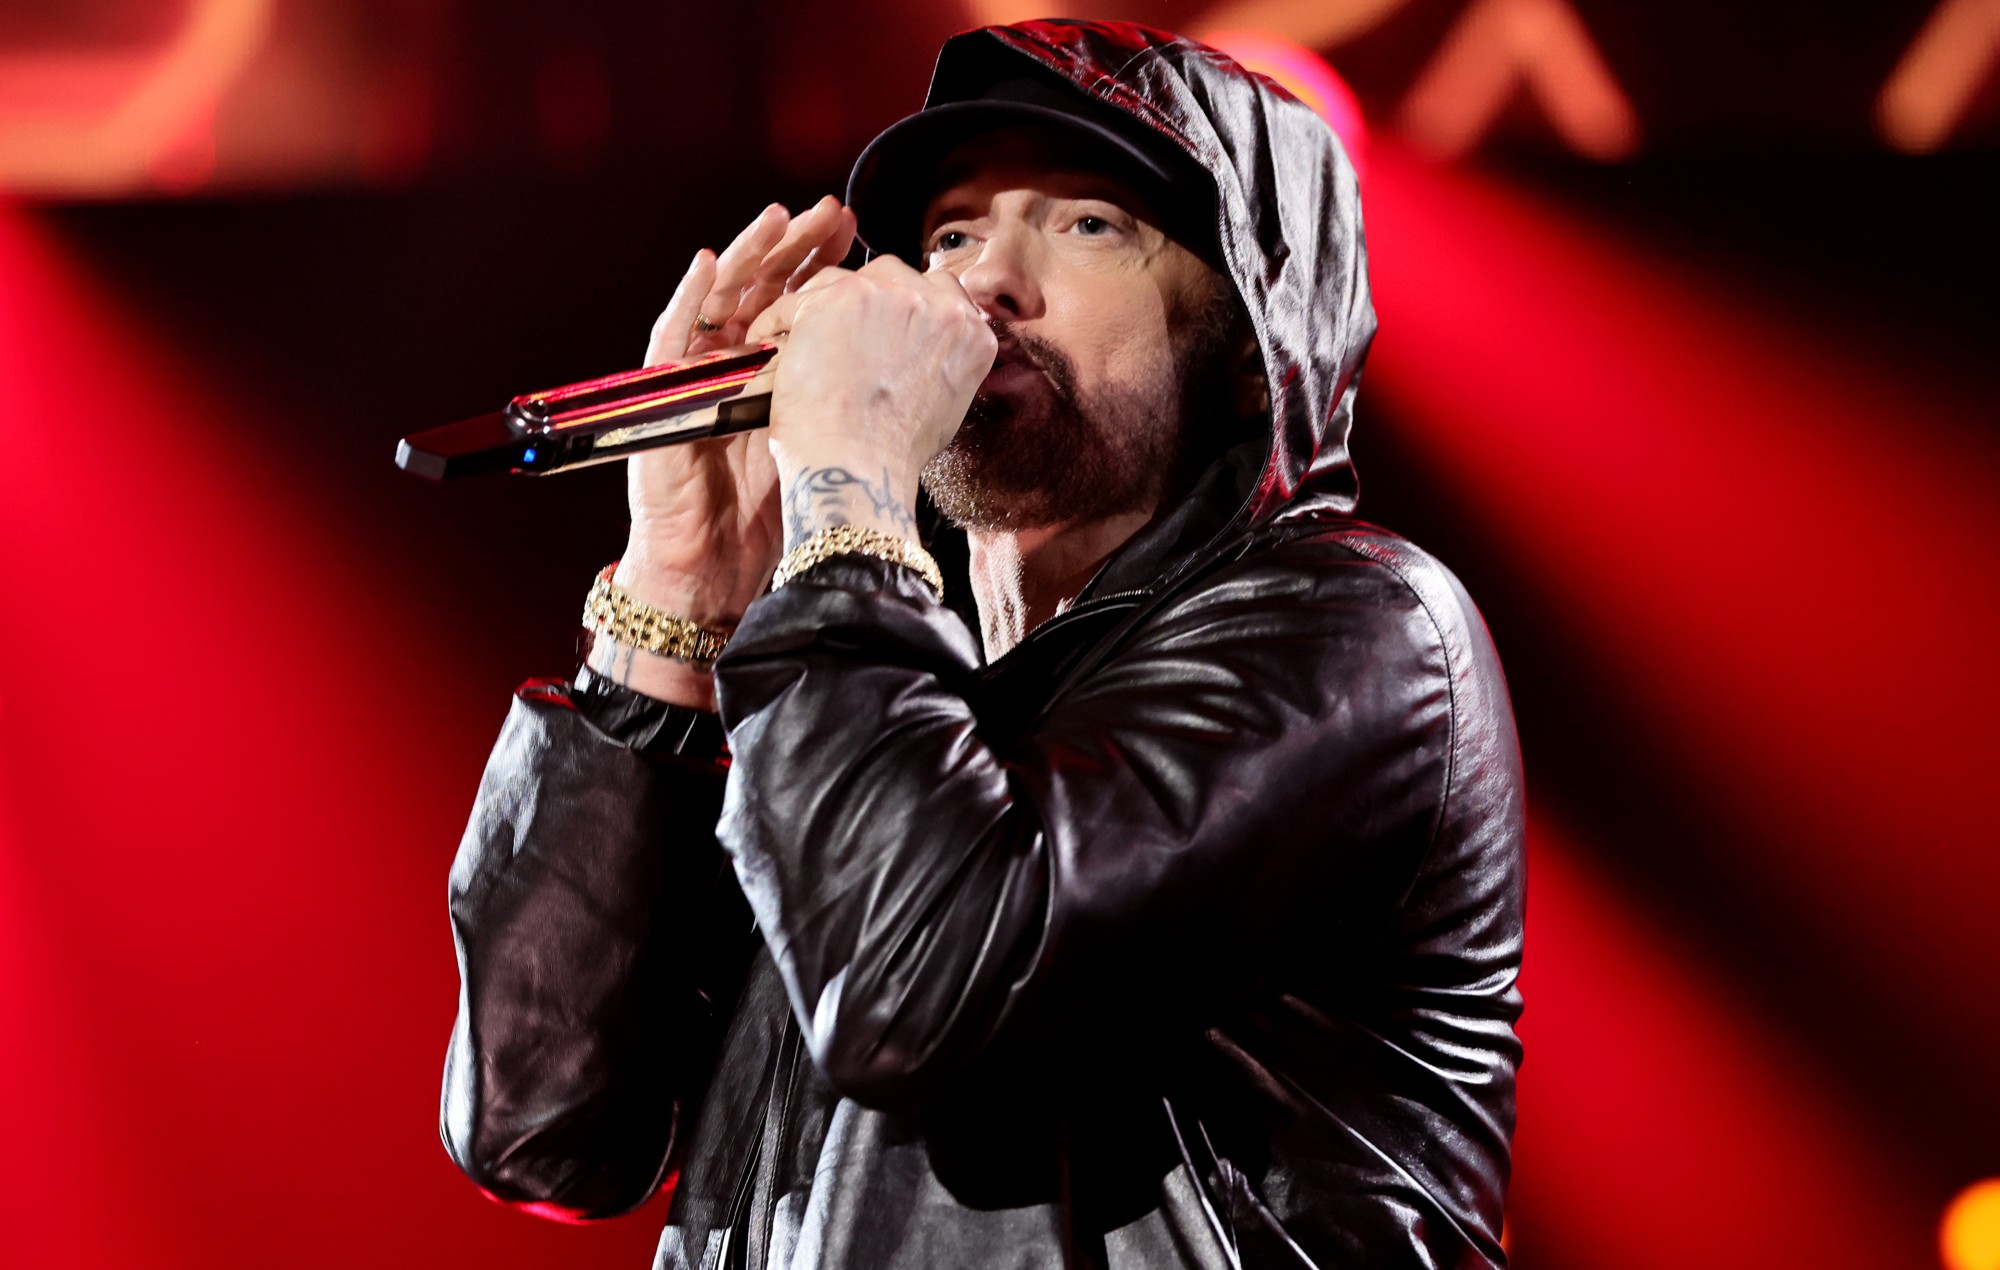 Eminem appears to be teasing ‘Fortnite’ collaboration